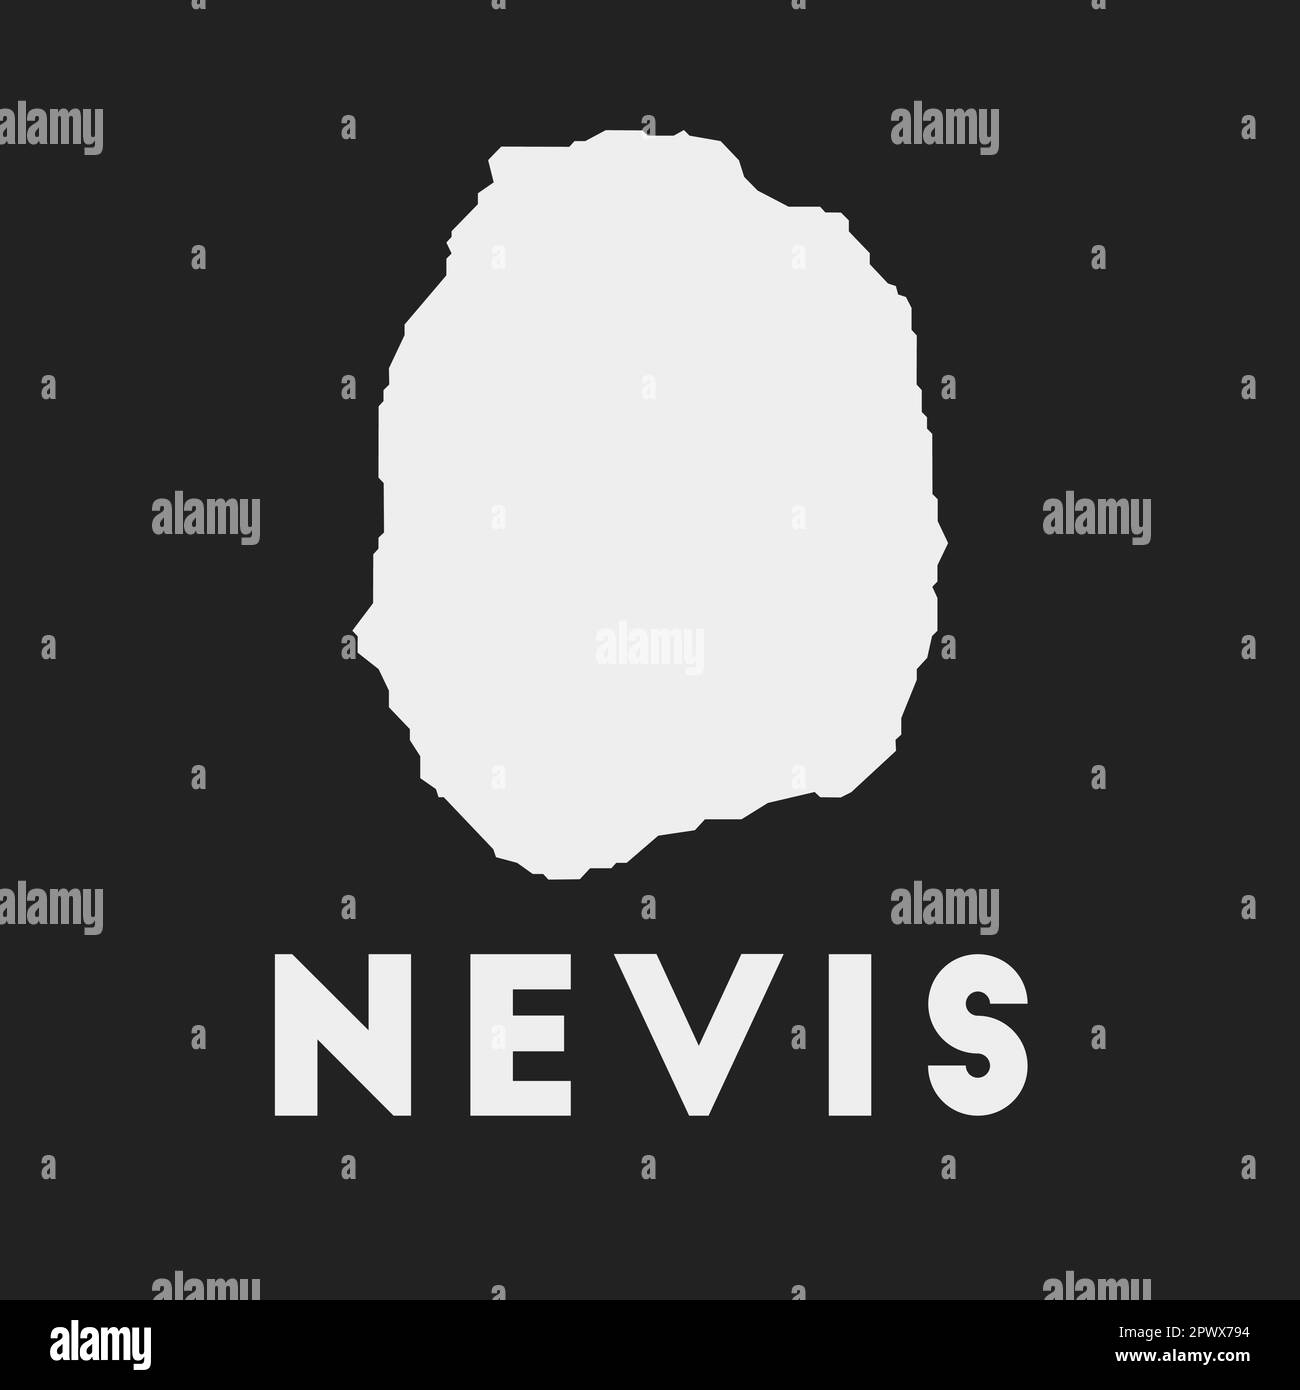 Nevis icon. Island map on dark background. Stylish Nevis map with island name. Vector illustration. Stock Vector